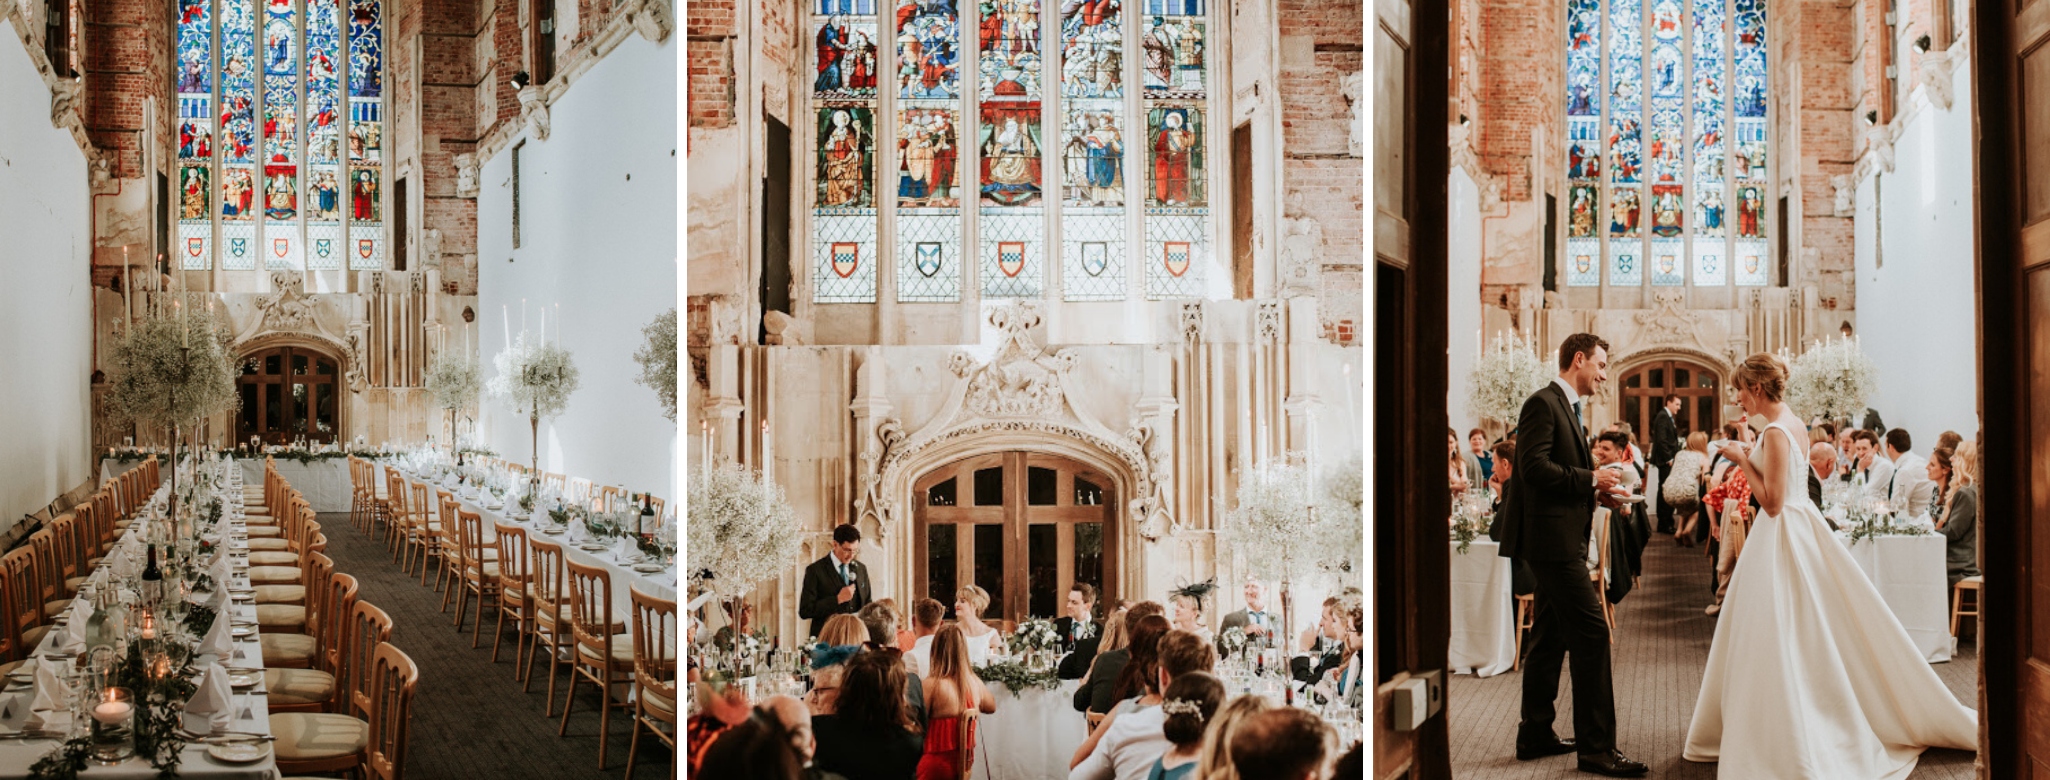 Highcliffe Castle's Great Hall decorated for a wedding breakfast. Bride and Groom are listening to speeches and enjoying their meal.